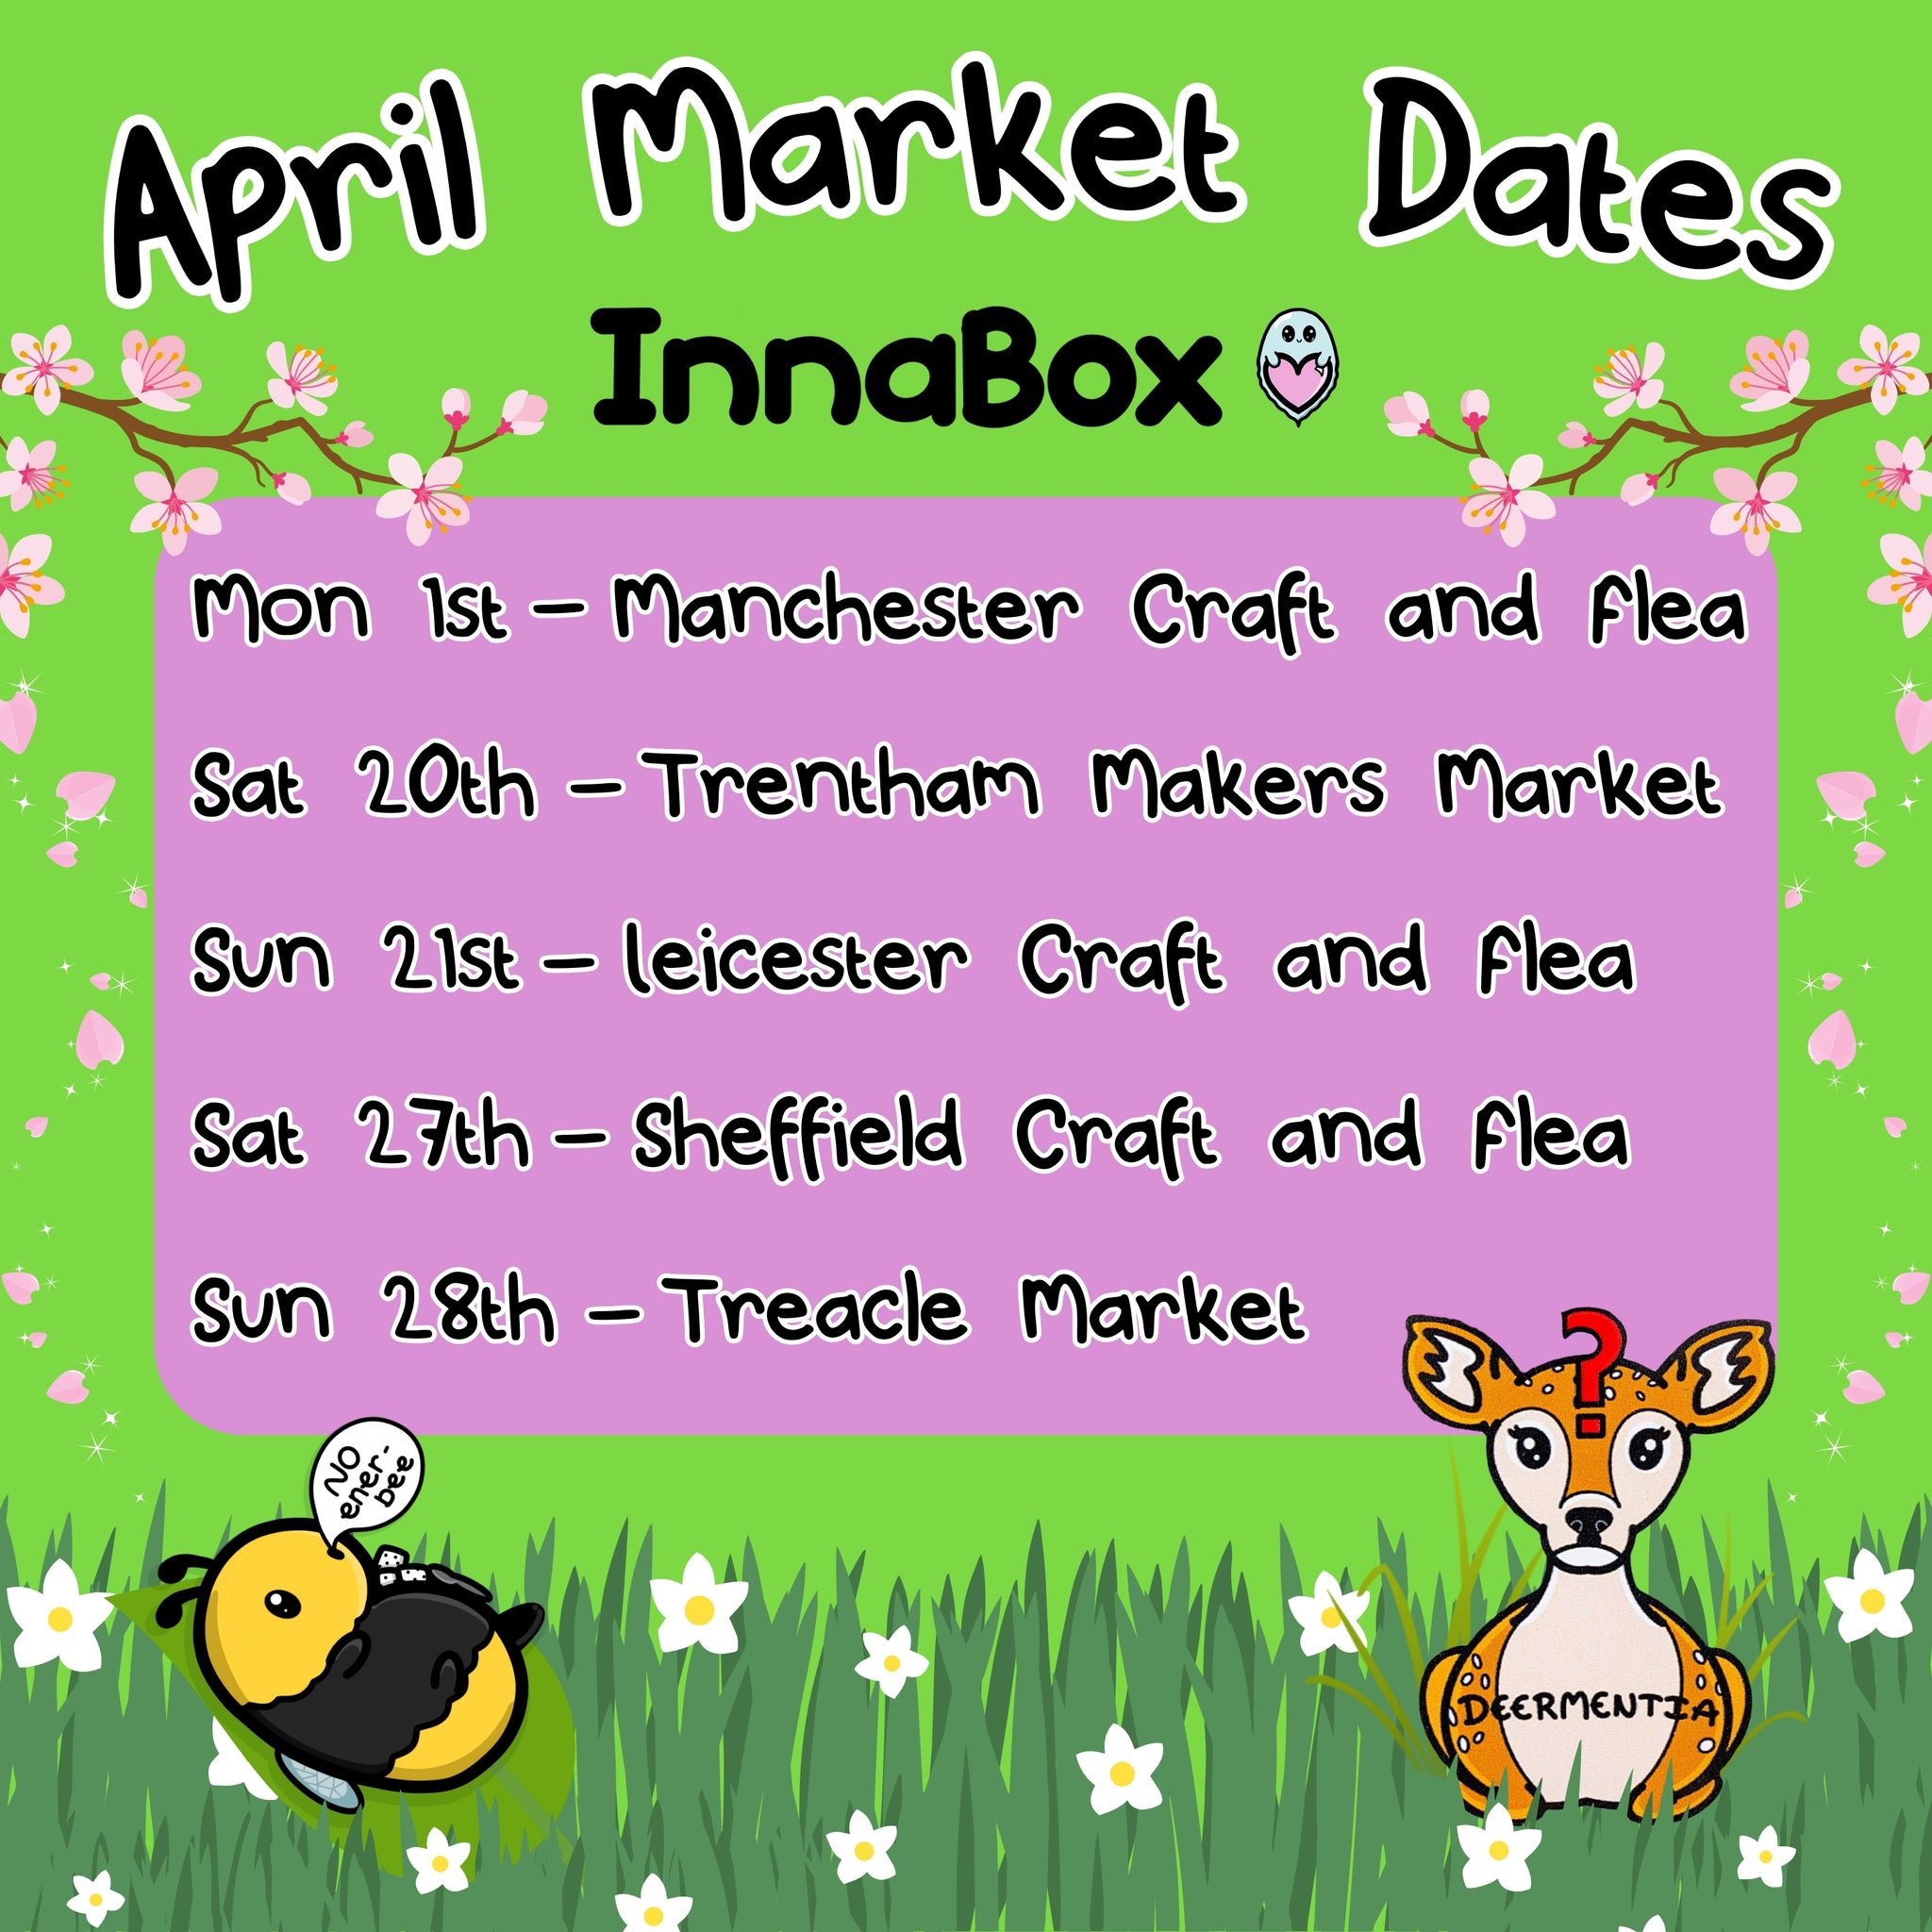 Innabox april market dates on a green background. Theres a pink square with the market dates, Mon 1st - manchester craft and flea, Sat 20th - trentham makers market, sun 21st - leicester craft and flea, sat 27th - sheffield craft and flea & sun 28th - treacle market. Surrounding the dates is cherry blossoms, green grass with daffodils and the innabox no energy bee snoozing on a leaf and the deermentia deer.